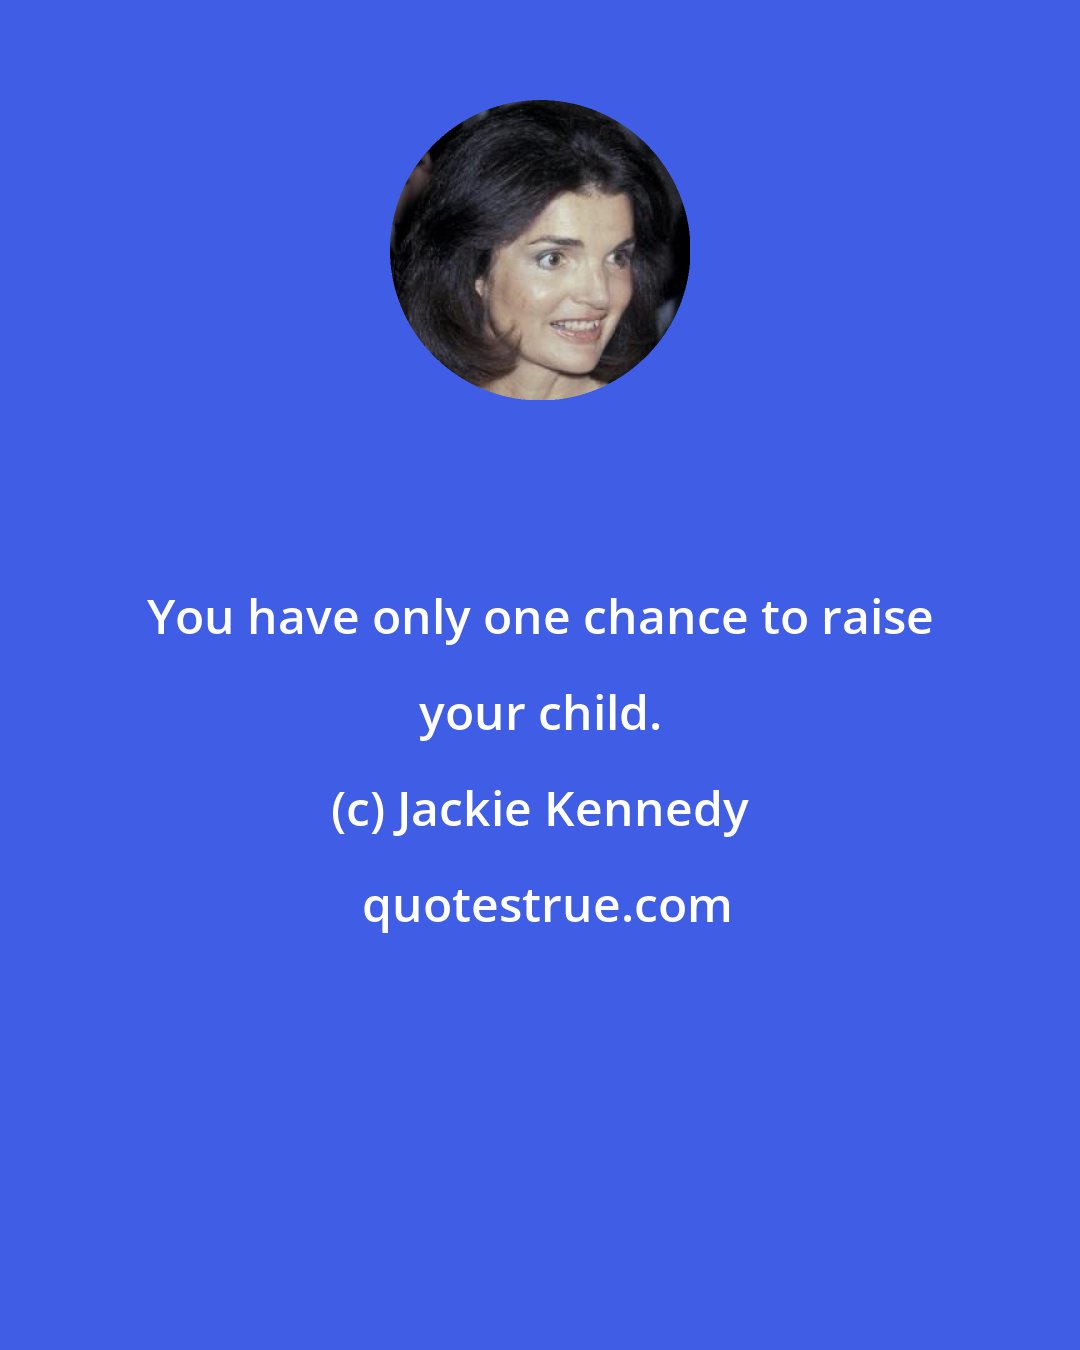 Jackie Kennedy: You have only one chance to raise your child.